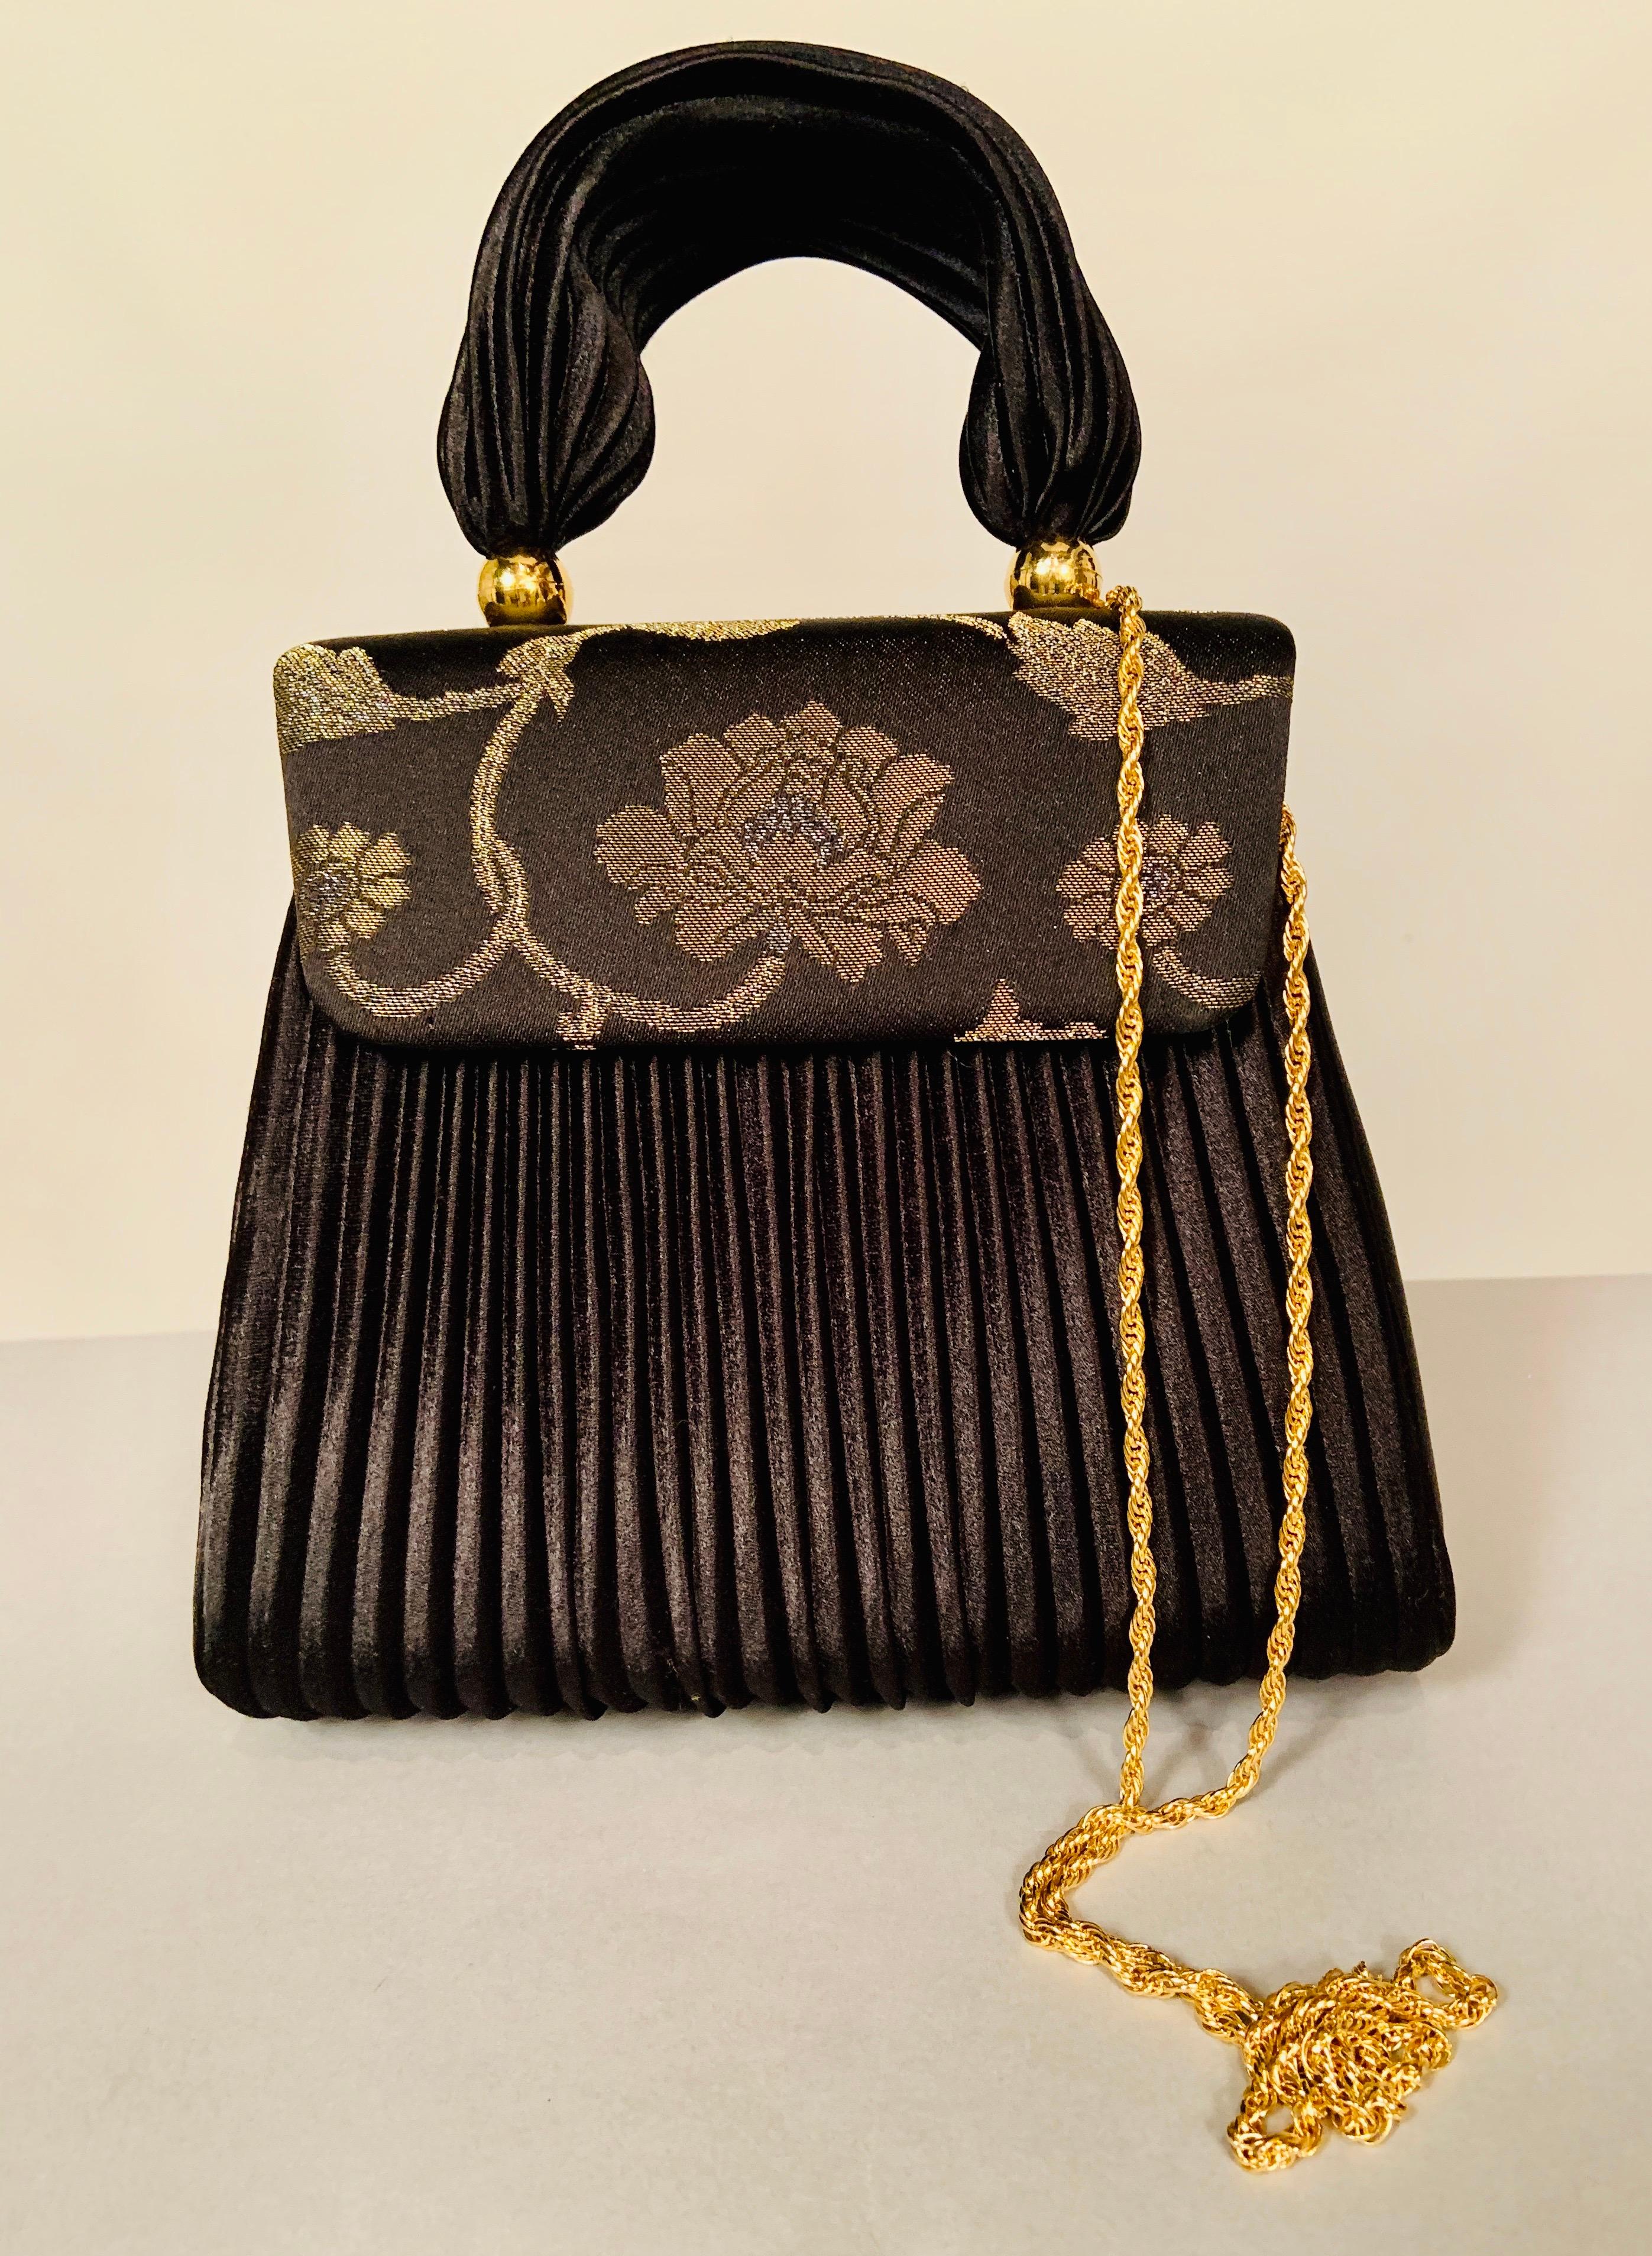 This elegant evening bag has more than enough style to compensate for the lack of a label. The handle and the bag are made form black Fortuny style pleated fabric and the top of the bag is silver and gold floral brocade. The interior is a pristine